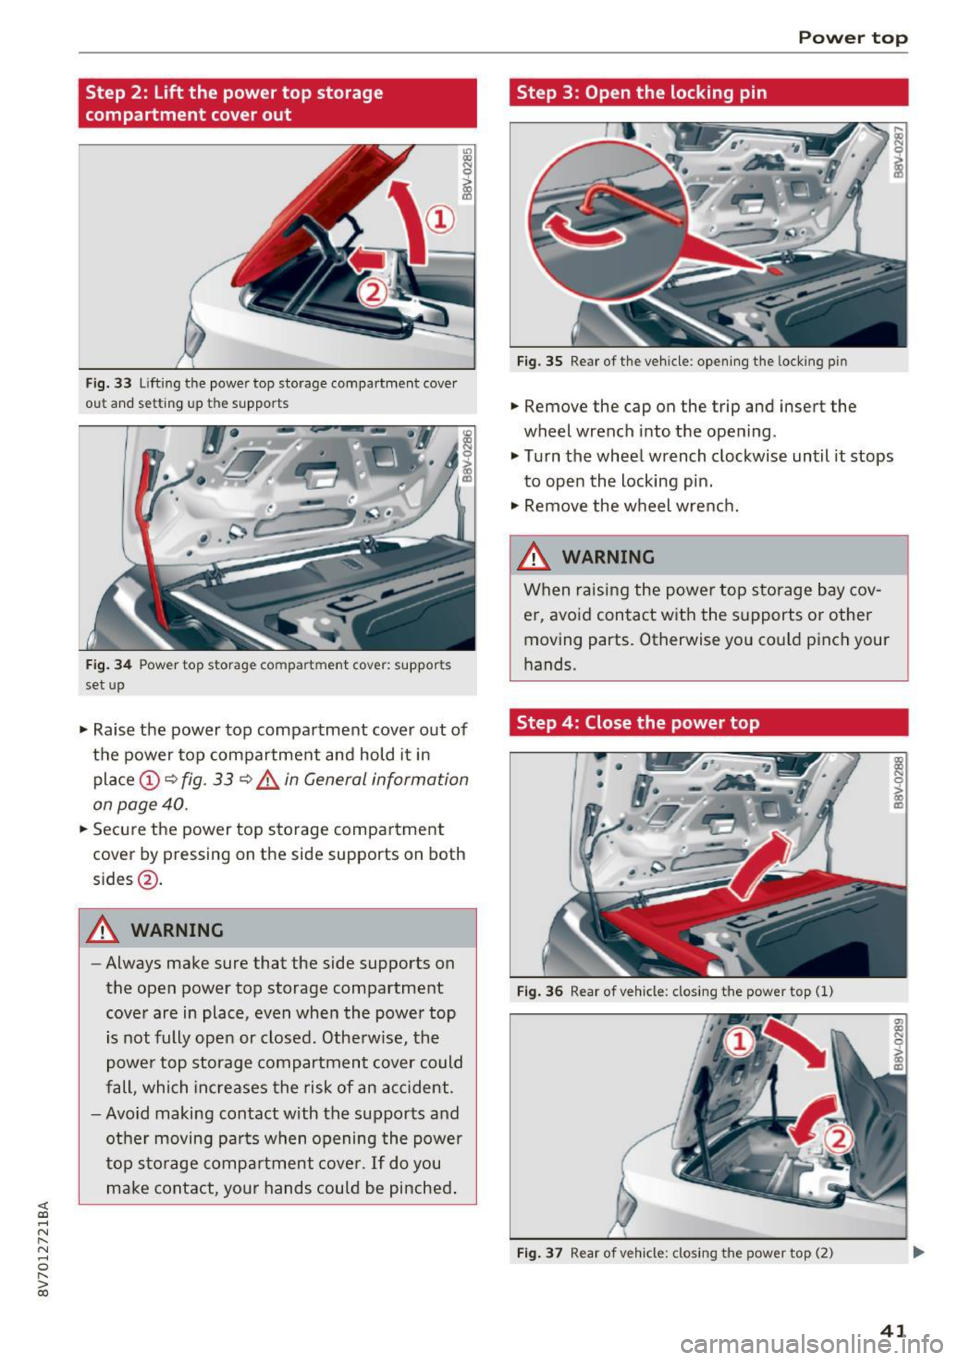 AUDI A3 CABRIOLET 2016  Owners Manual <( co ..... N 
" N ..... 0 r--. > 00 
Step  2:  Lift the  power  top  storage 
compartment  cover out 
Fig. 33 Lifting the  power top storage  compartment  cover 
out  and  setting  up the  supports 
